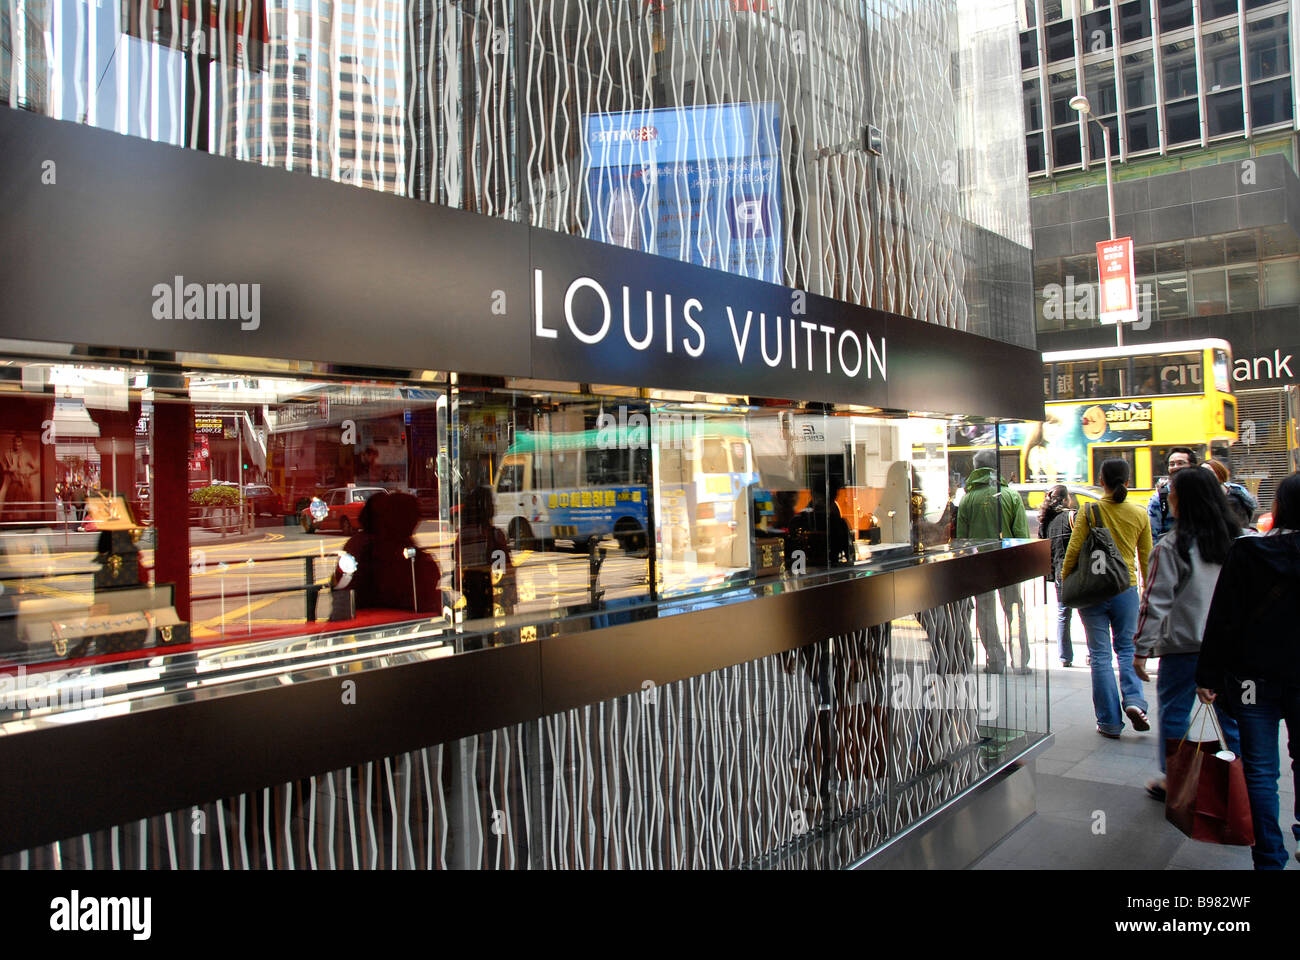 Louis Vuitton Luxe High Resolution Stock Photography and Images - Alamy